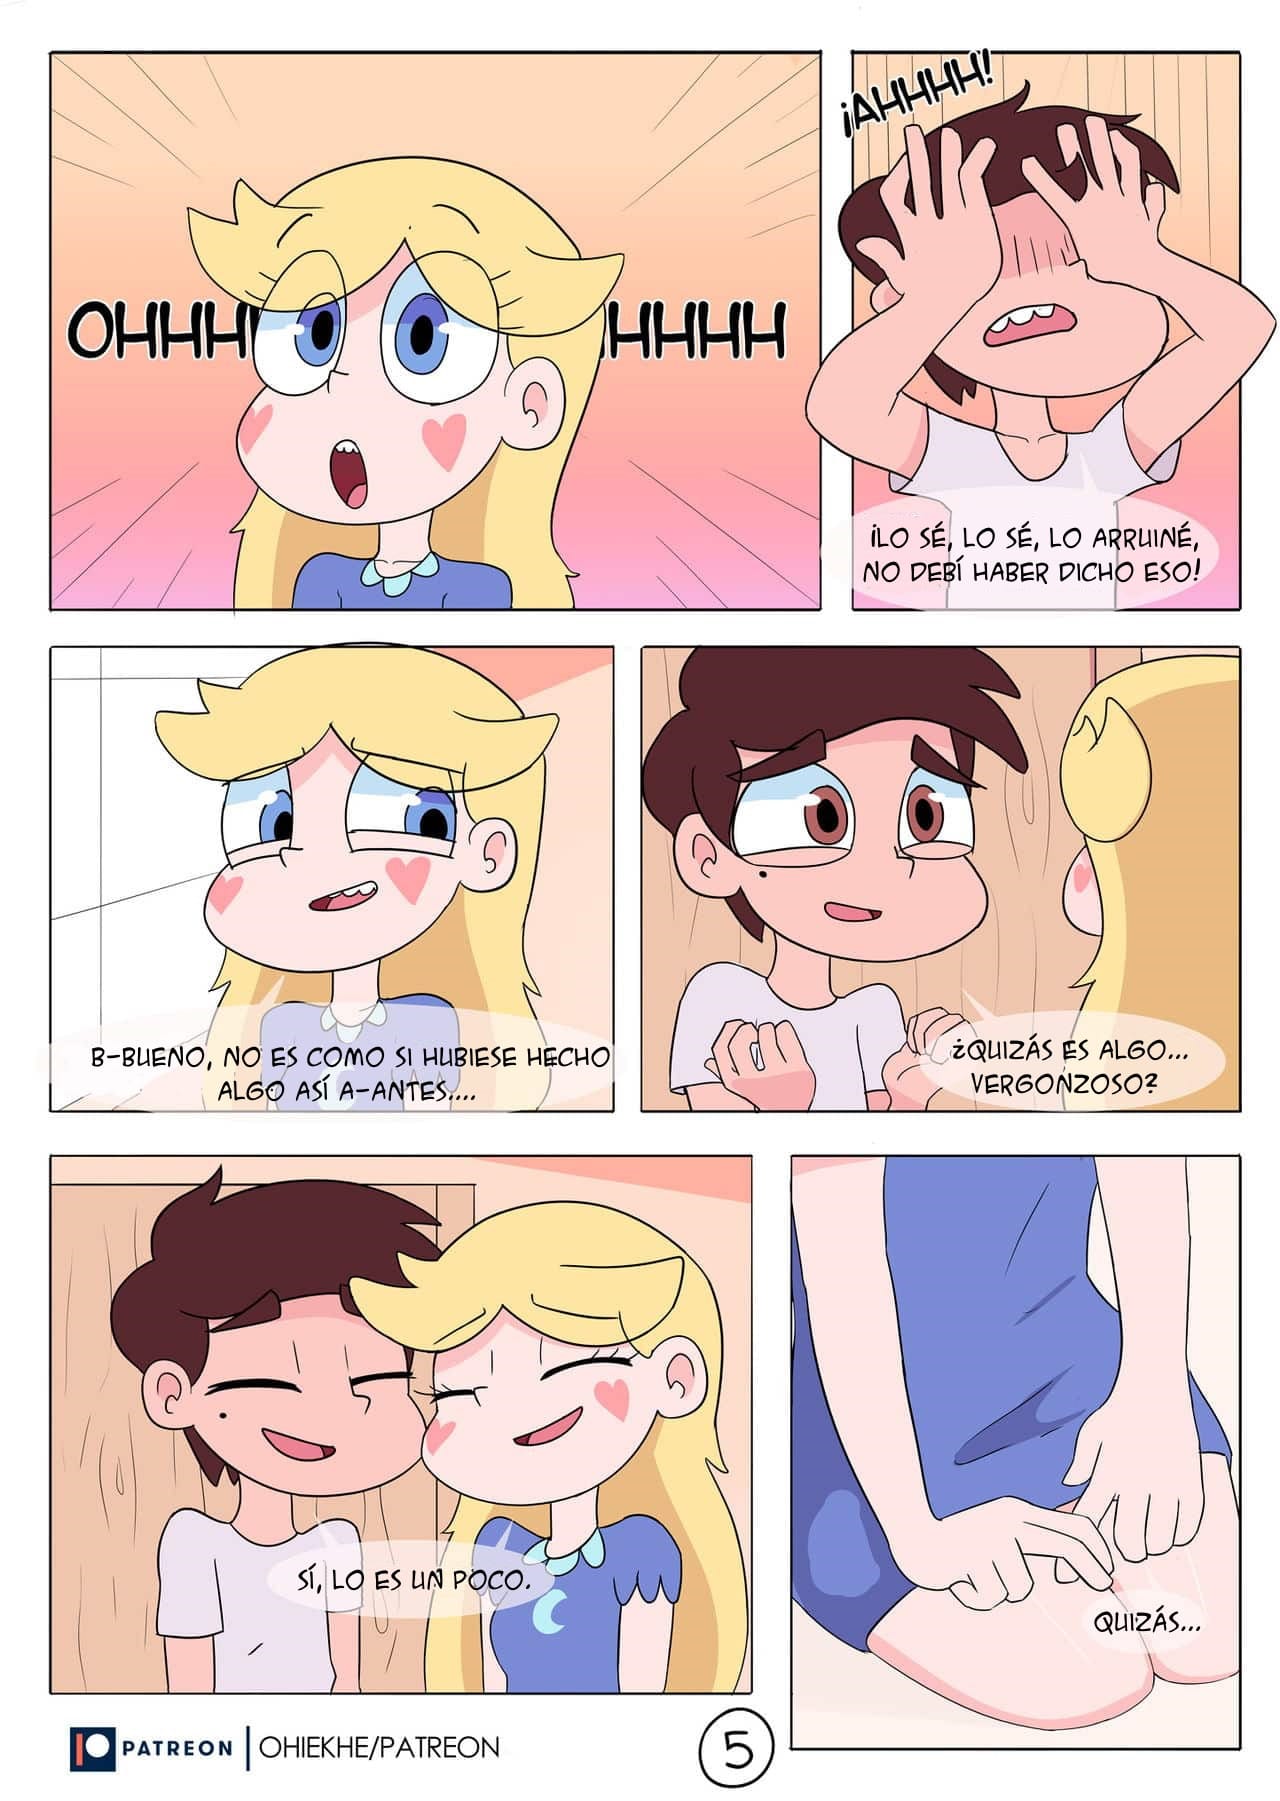 Time Alone – Star vs the Forces of Evil - 6